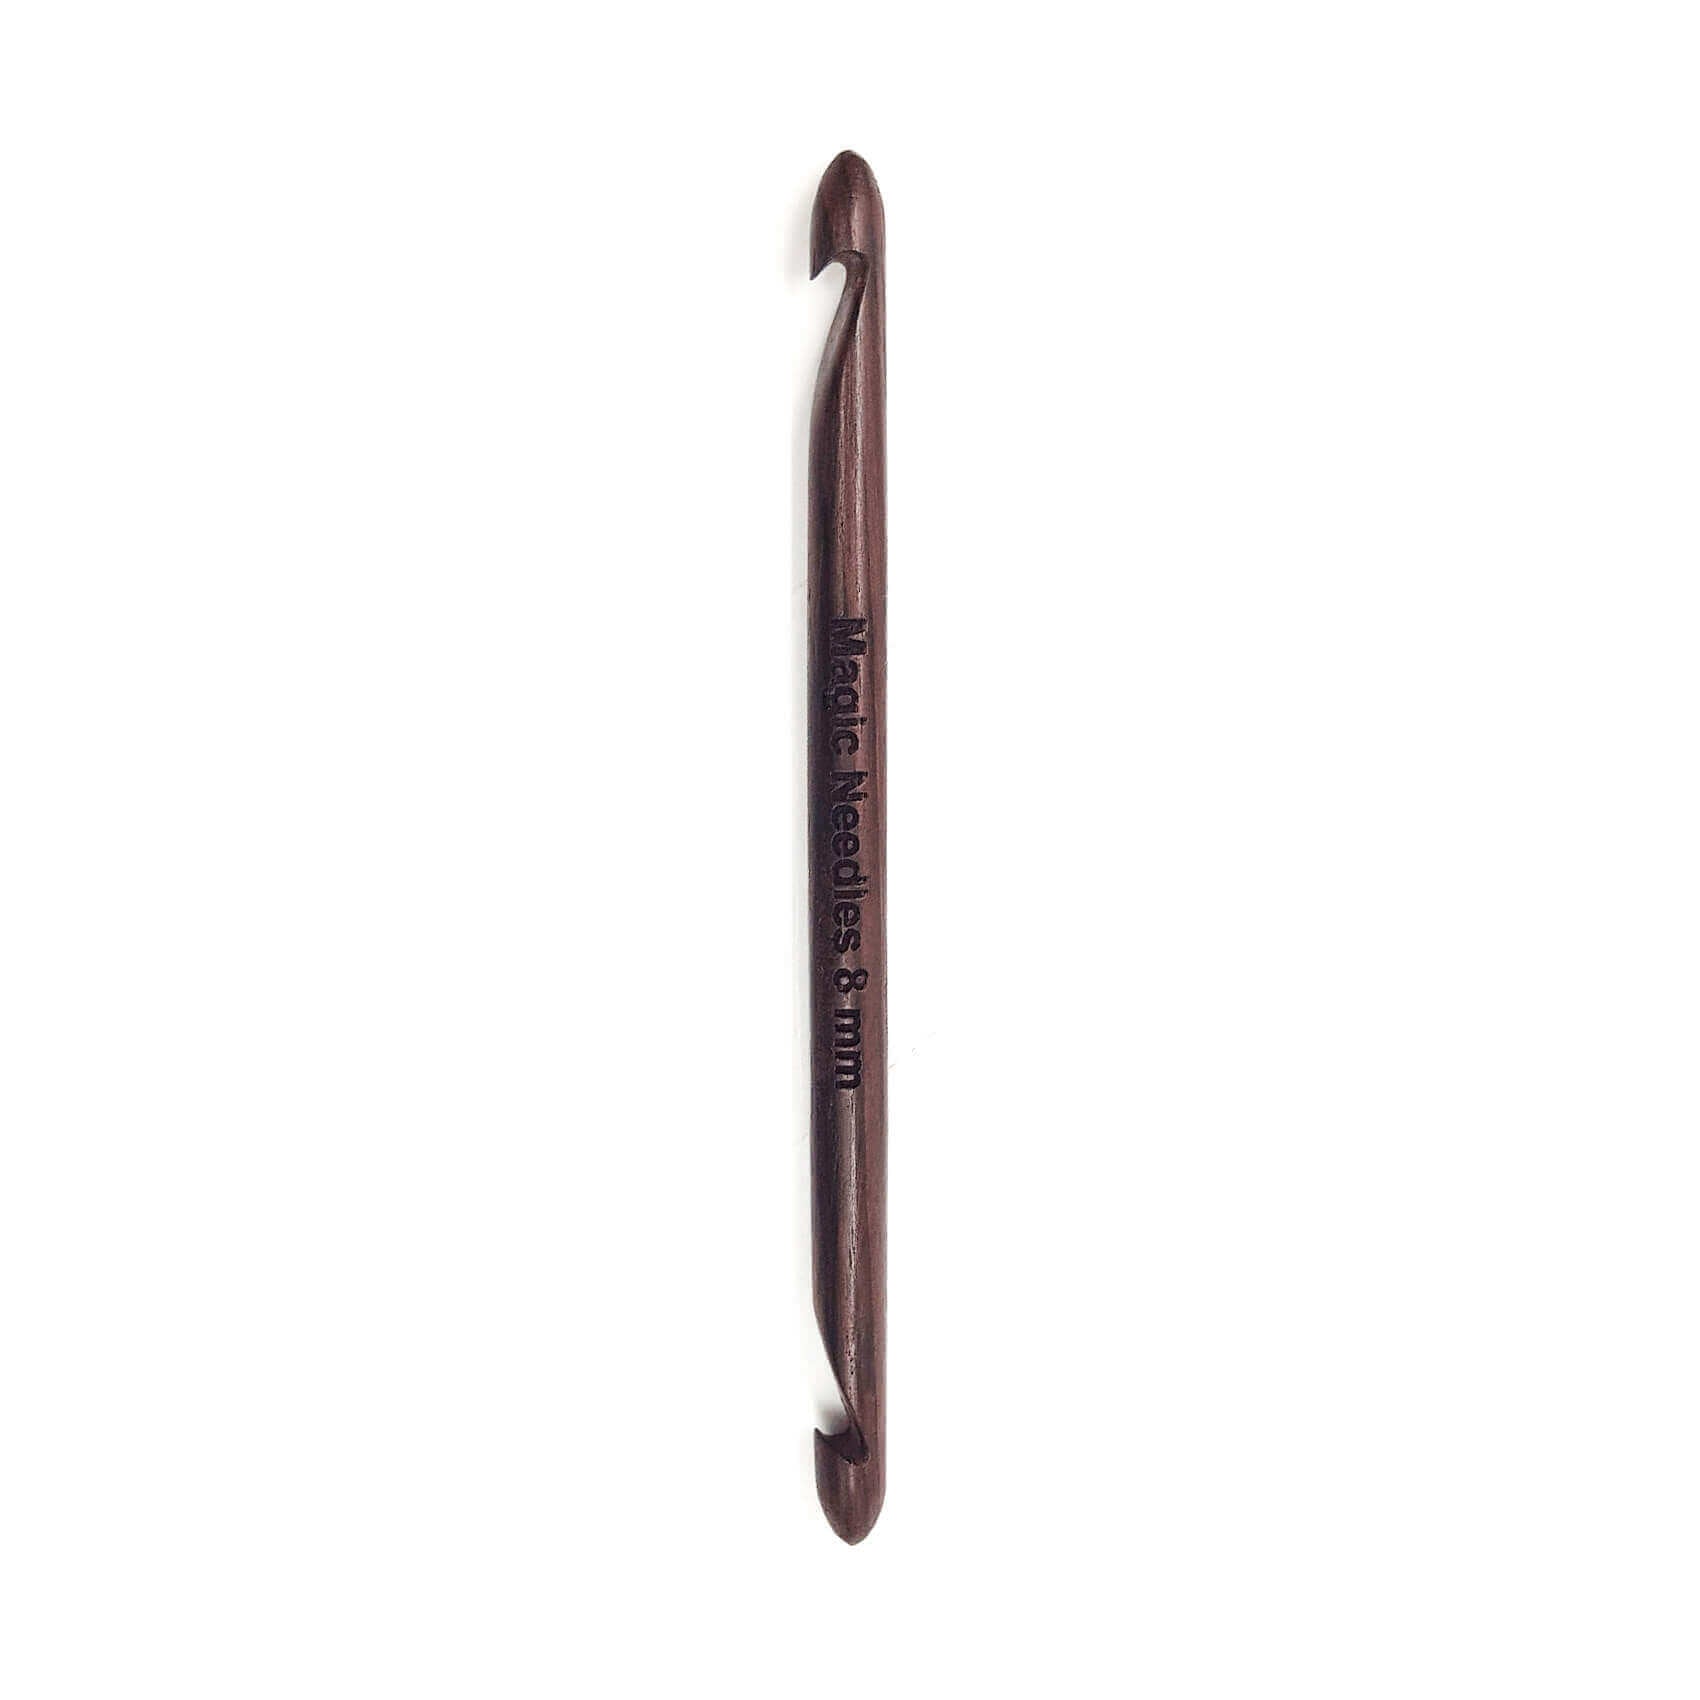 Rosewood Double Ended Crochet Hook - 8 mm